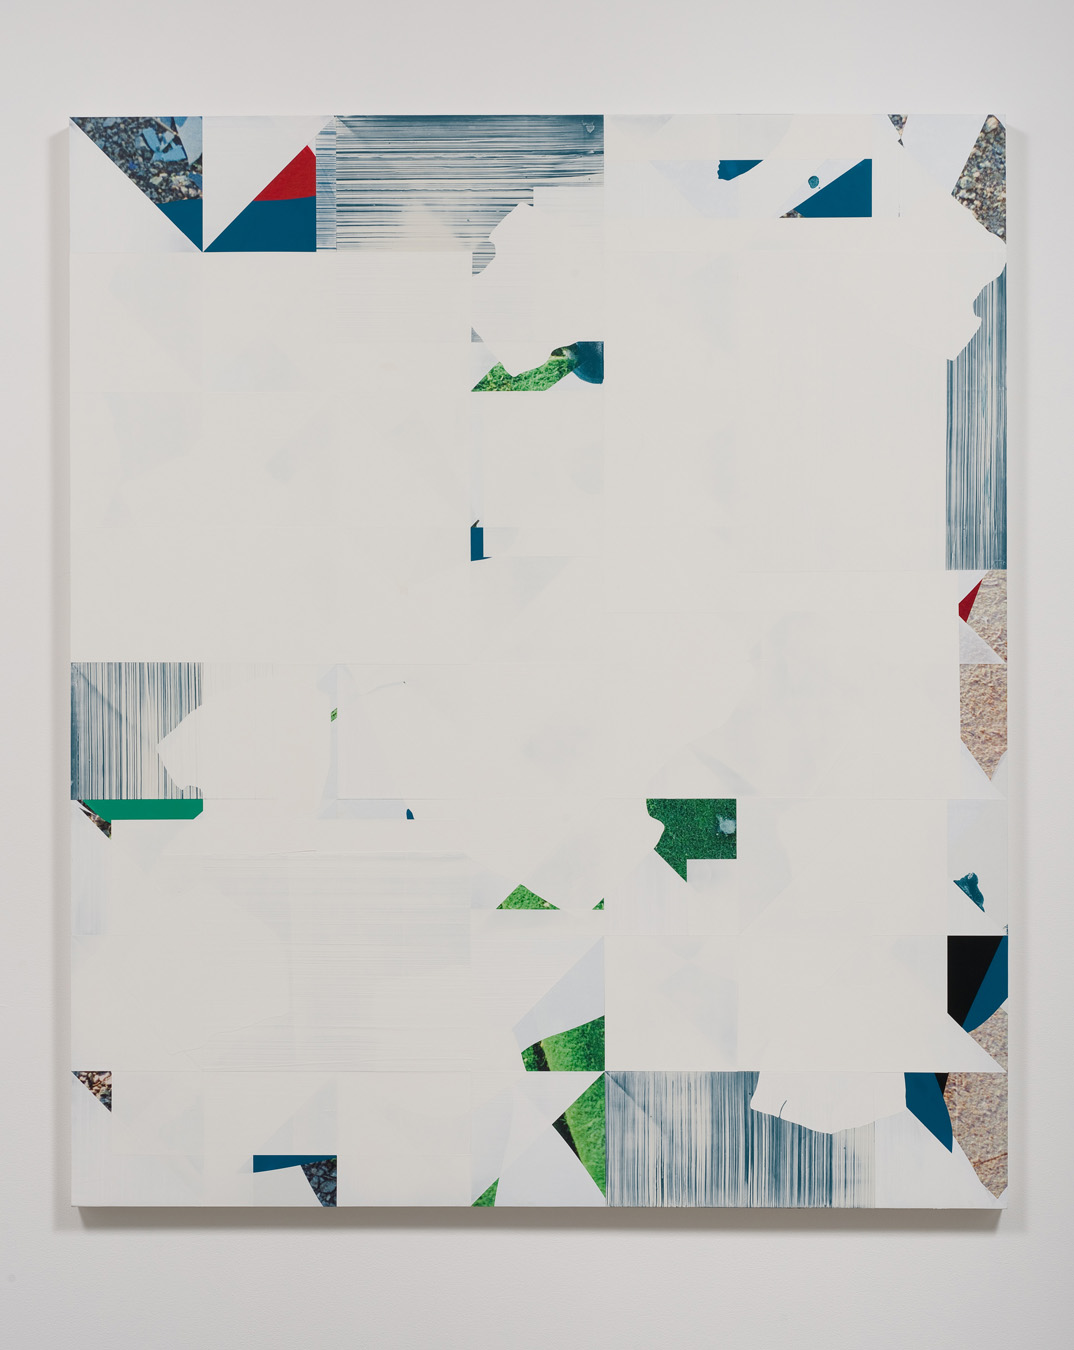  Salton Sea (Green Rug), 2012  Acrylic, oil and UV cured ink on canvas over panel  77 x 66 inches  195.58 x 167.64 cm       